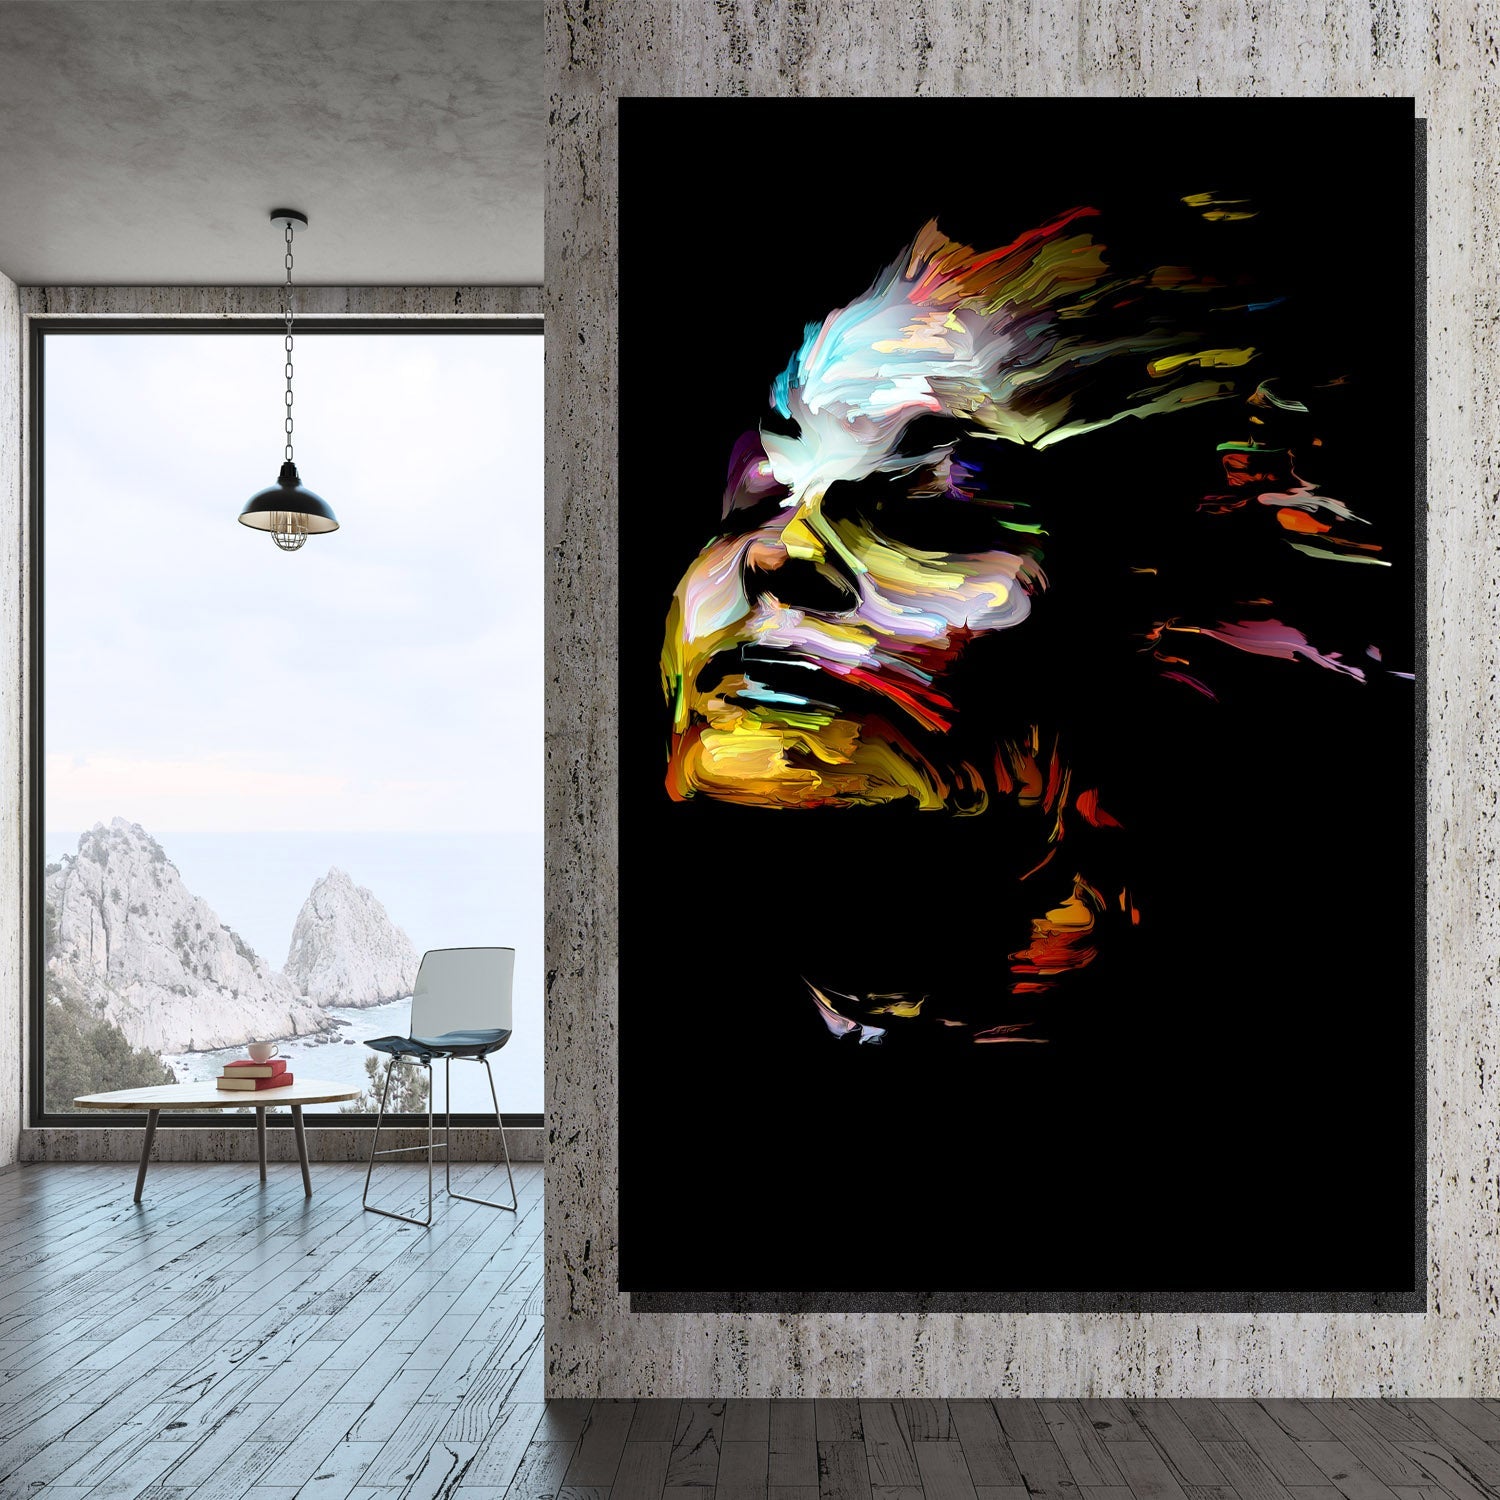 https://cdn.shopify.com/s/files/1/0387/9986/8044/products/FreedomCanvasArtprintStretched-4.jpg